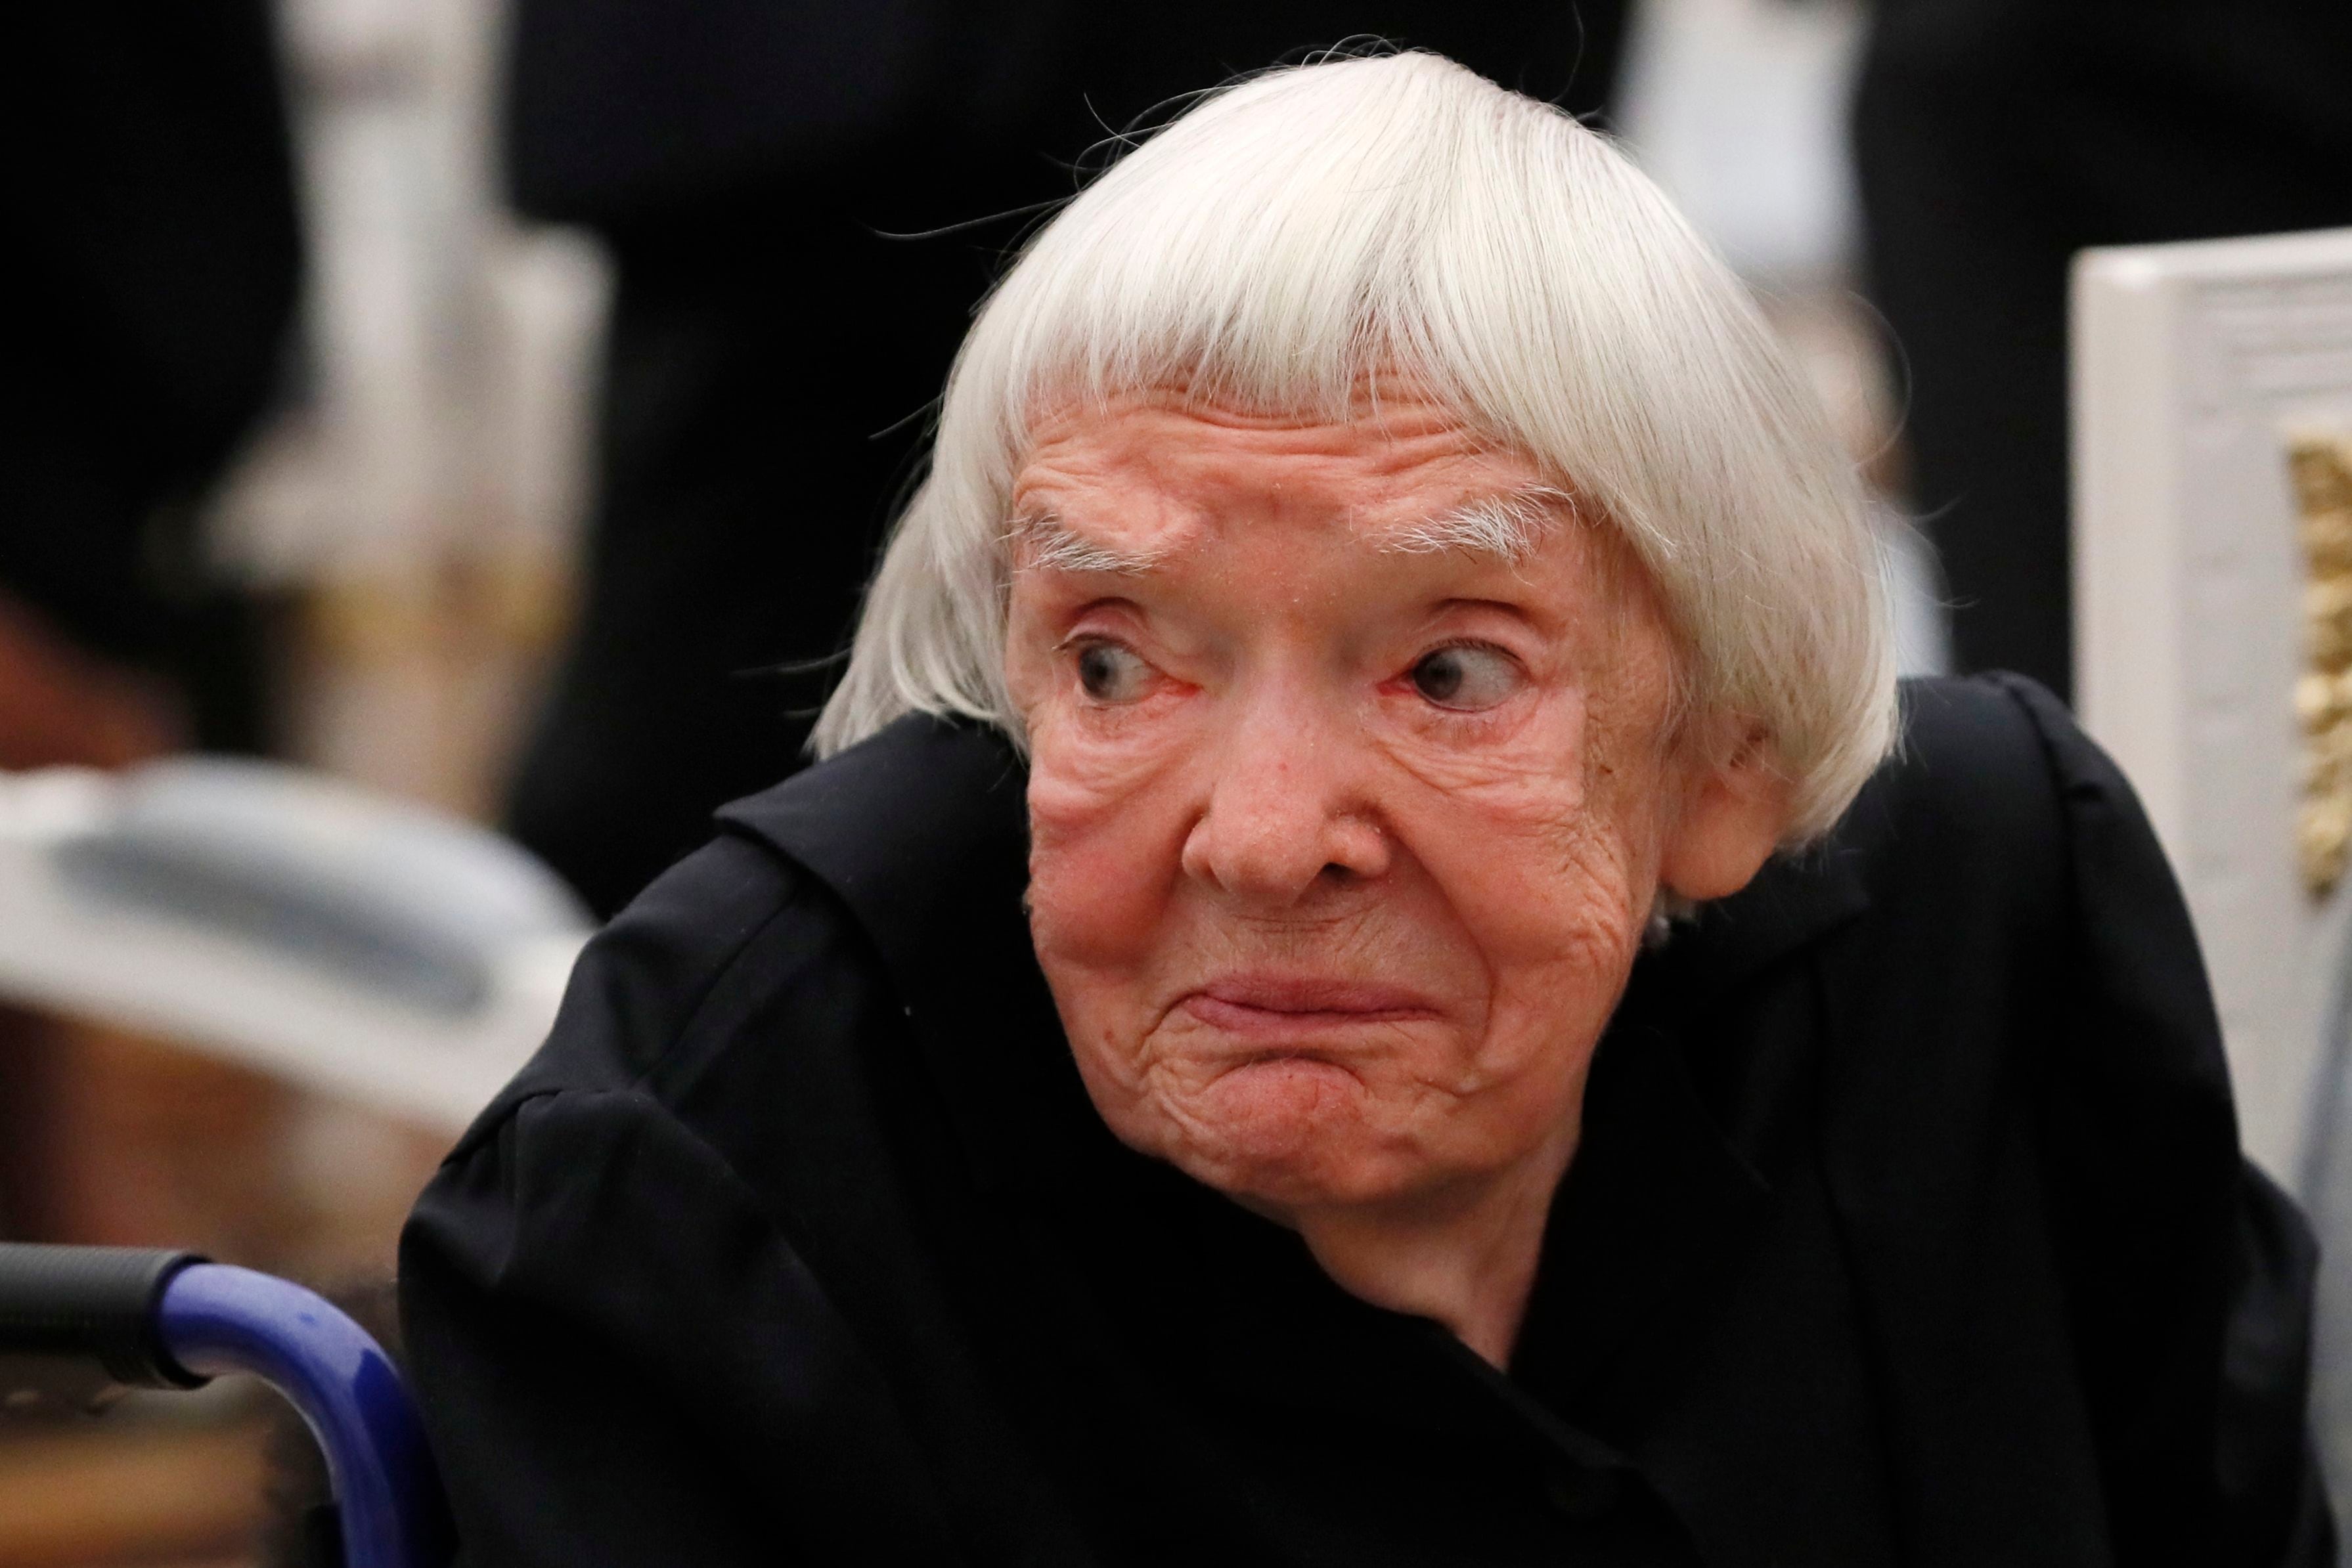 Legendary Russian human rights defender and former director of the Helsinki Moscow Group, Lyudmila Alexeyeva, died in 2018 at the age of 91.  She was one of the few activists who was attended by Vladimir Putin himself.  (Yuri Kochetkov/Pool Photo via AP, File)